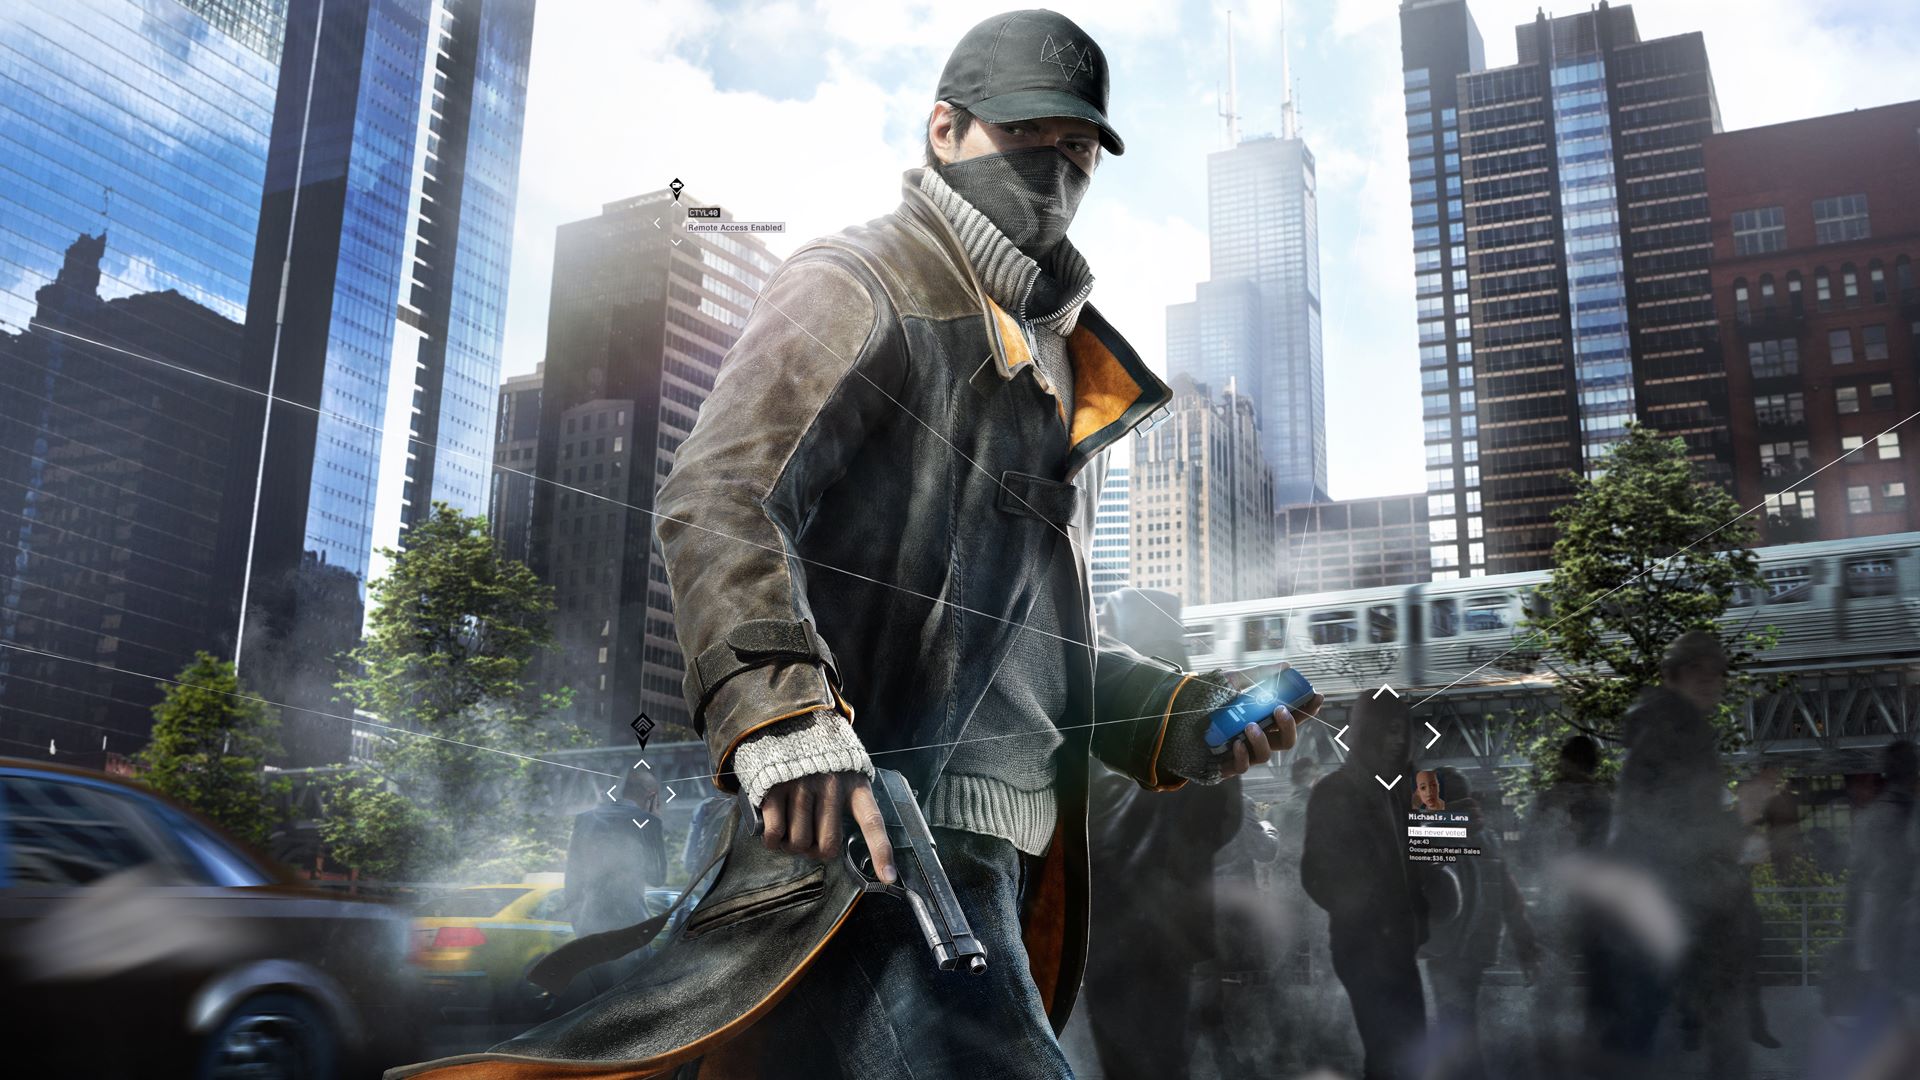 Watch dogs 2 setup download for windows 10